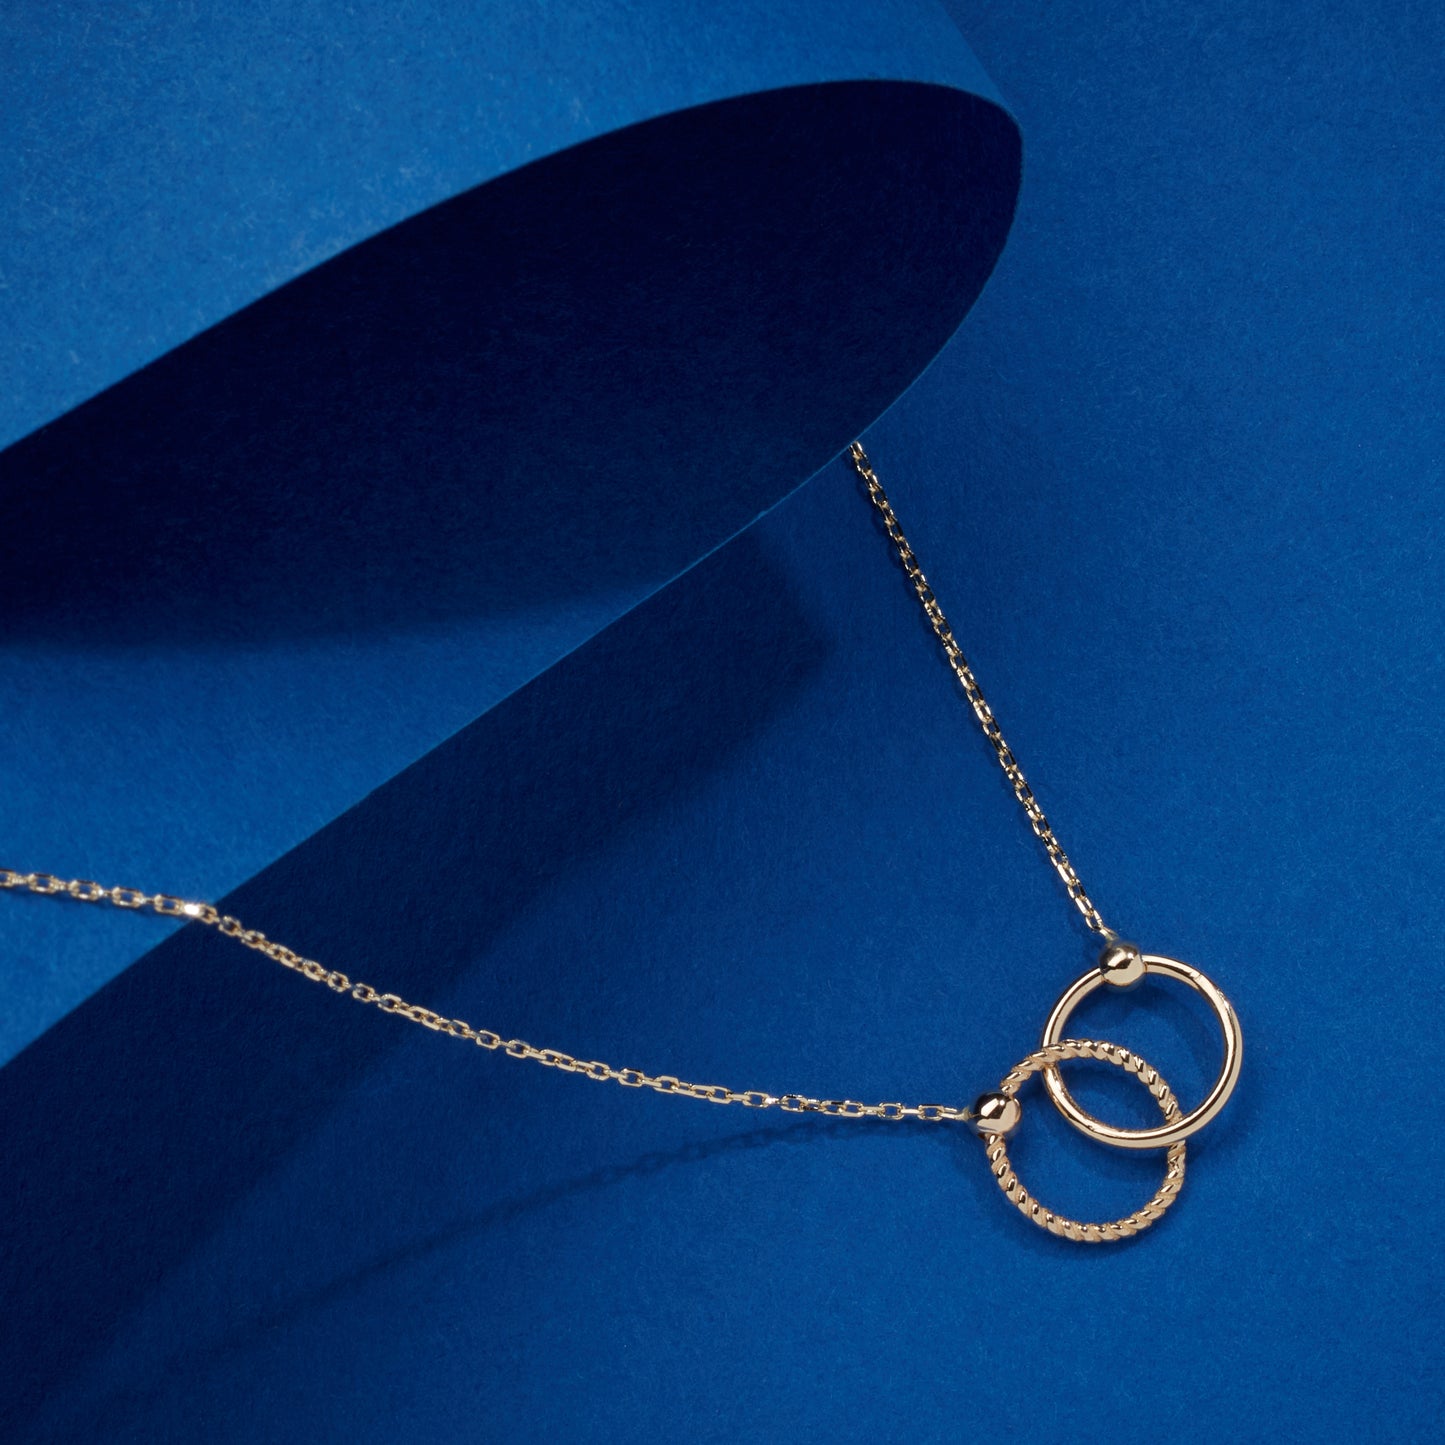 14k gold necklace, dainty gold necklace, gold necklace women, solid gold pendant, solid gold necklace, real gold necklace, yellow rose white, gold circle necklace, double circle charm, minimalist necklace, interlocking circles, gold double circle, two circles necklace, 